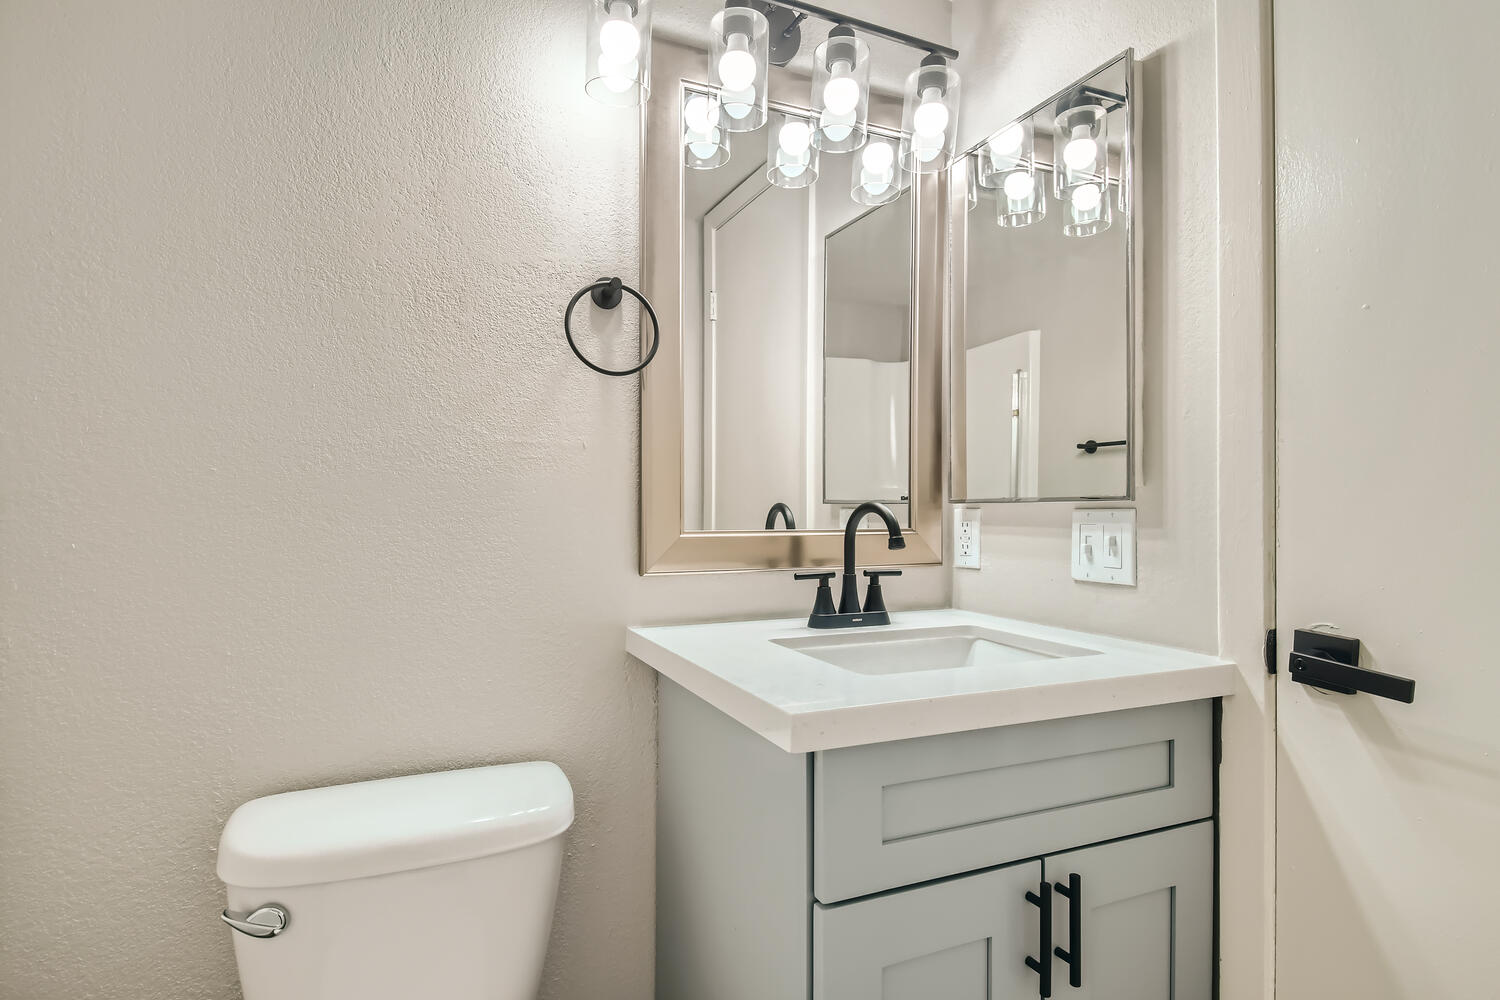 A remodeled bathroom at Rise on McClintock with a small quartz countertop vanity.